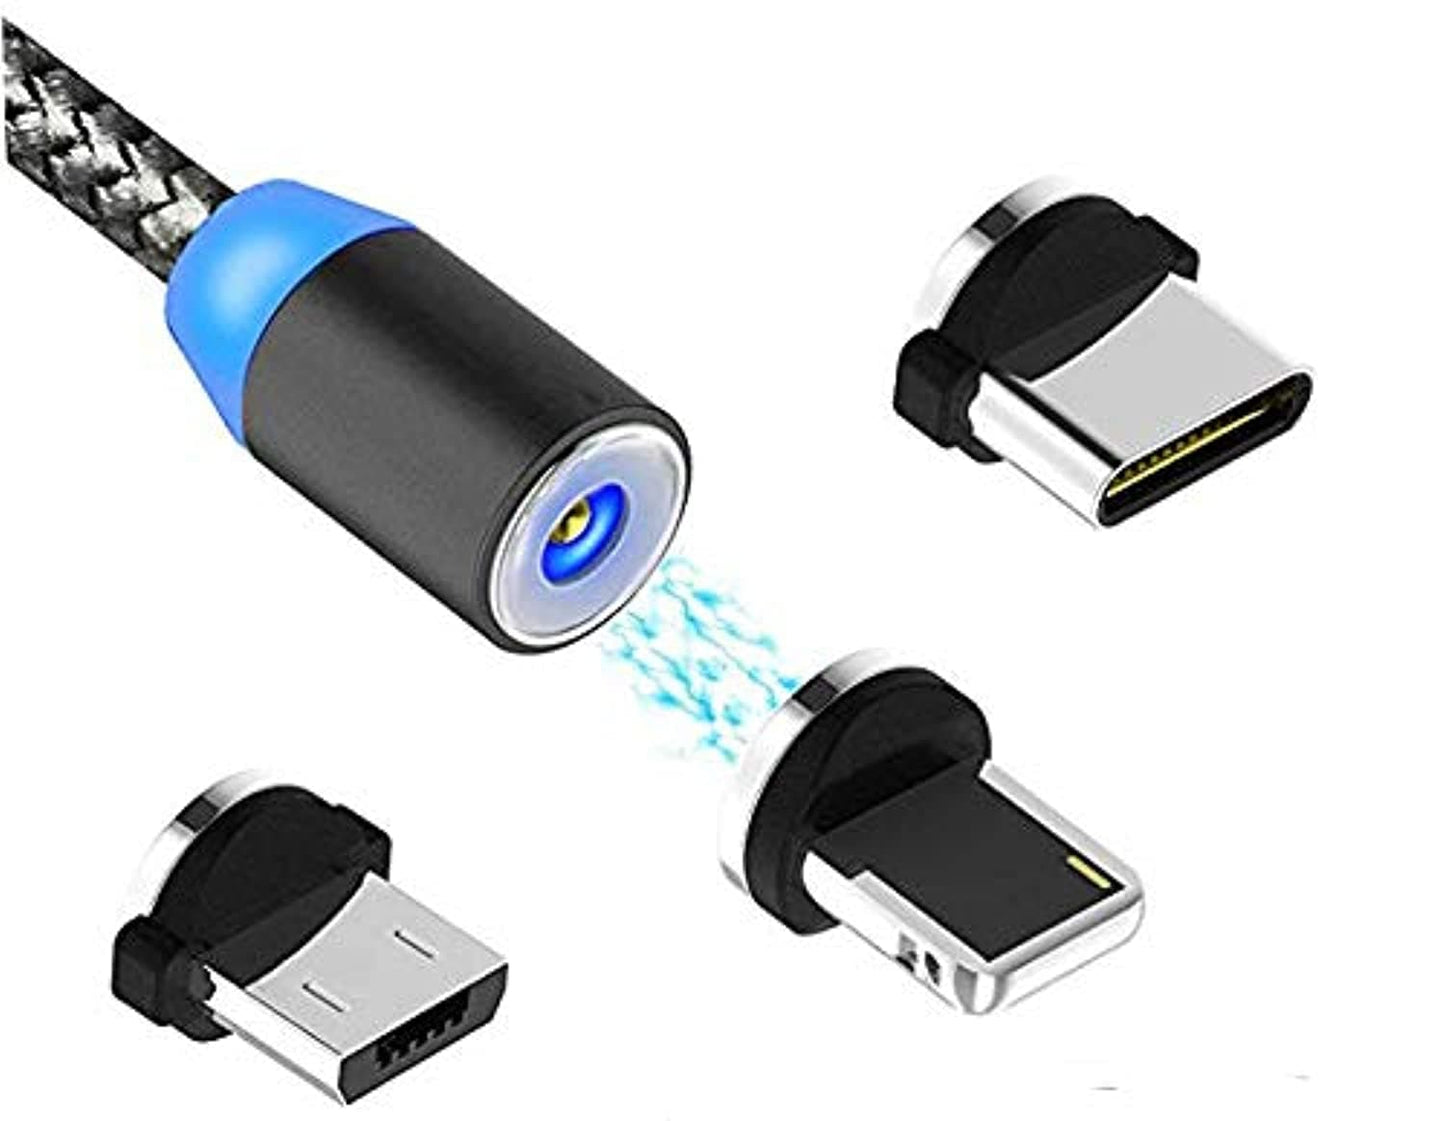 Magnetic USB Multi 3-in-1 Cable Charger with LED